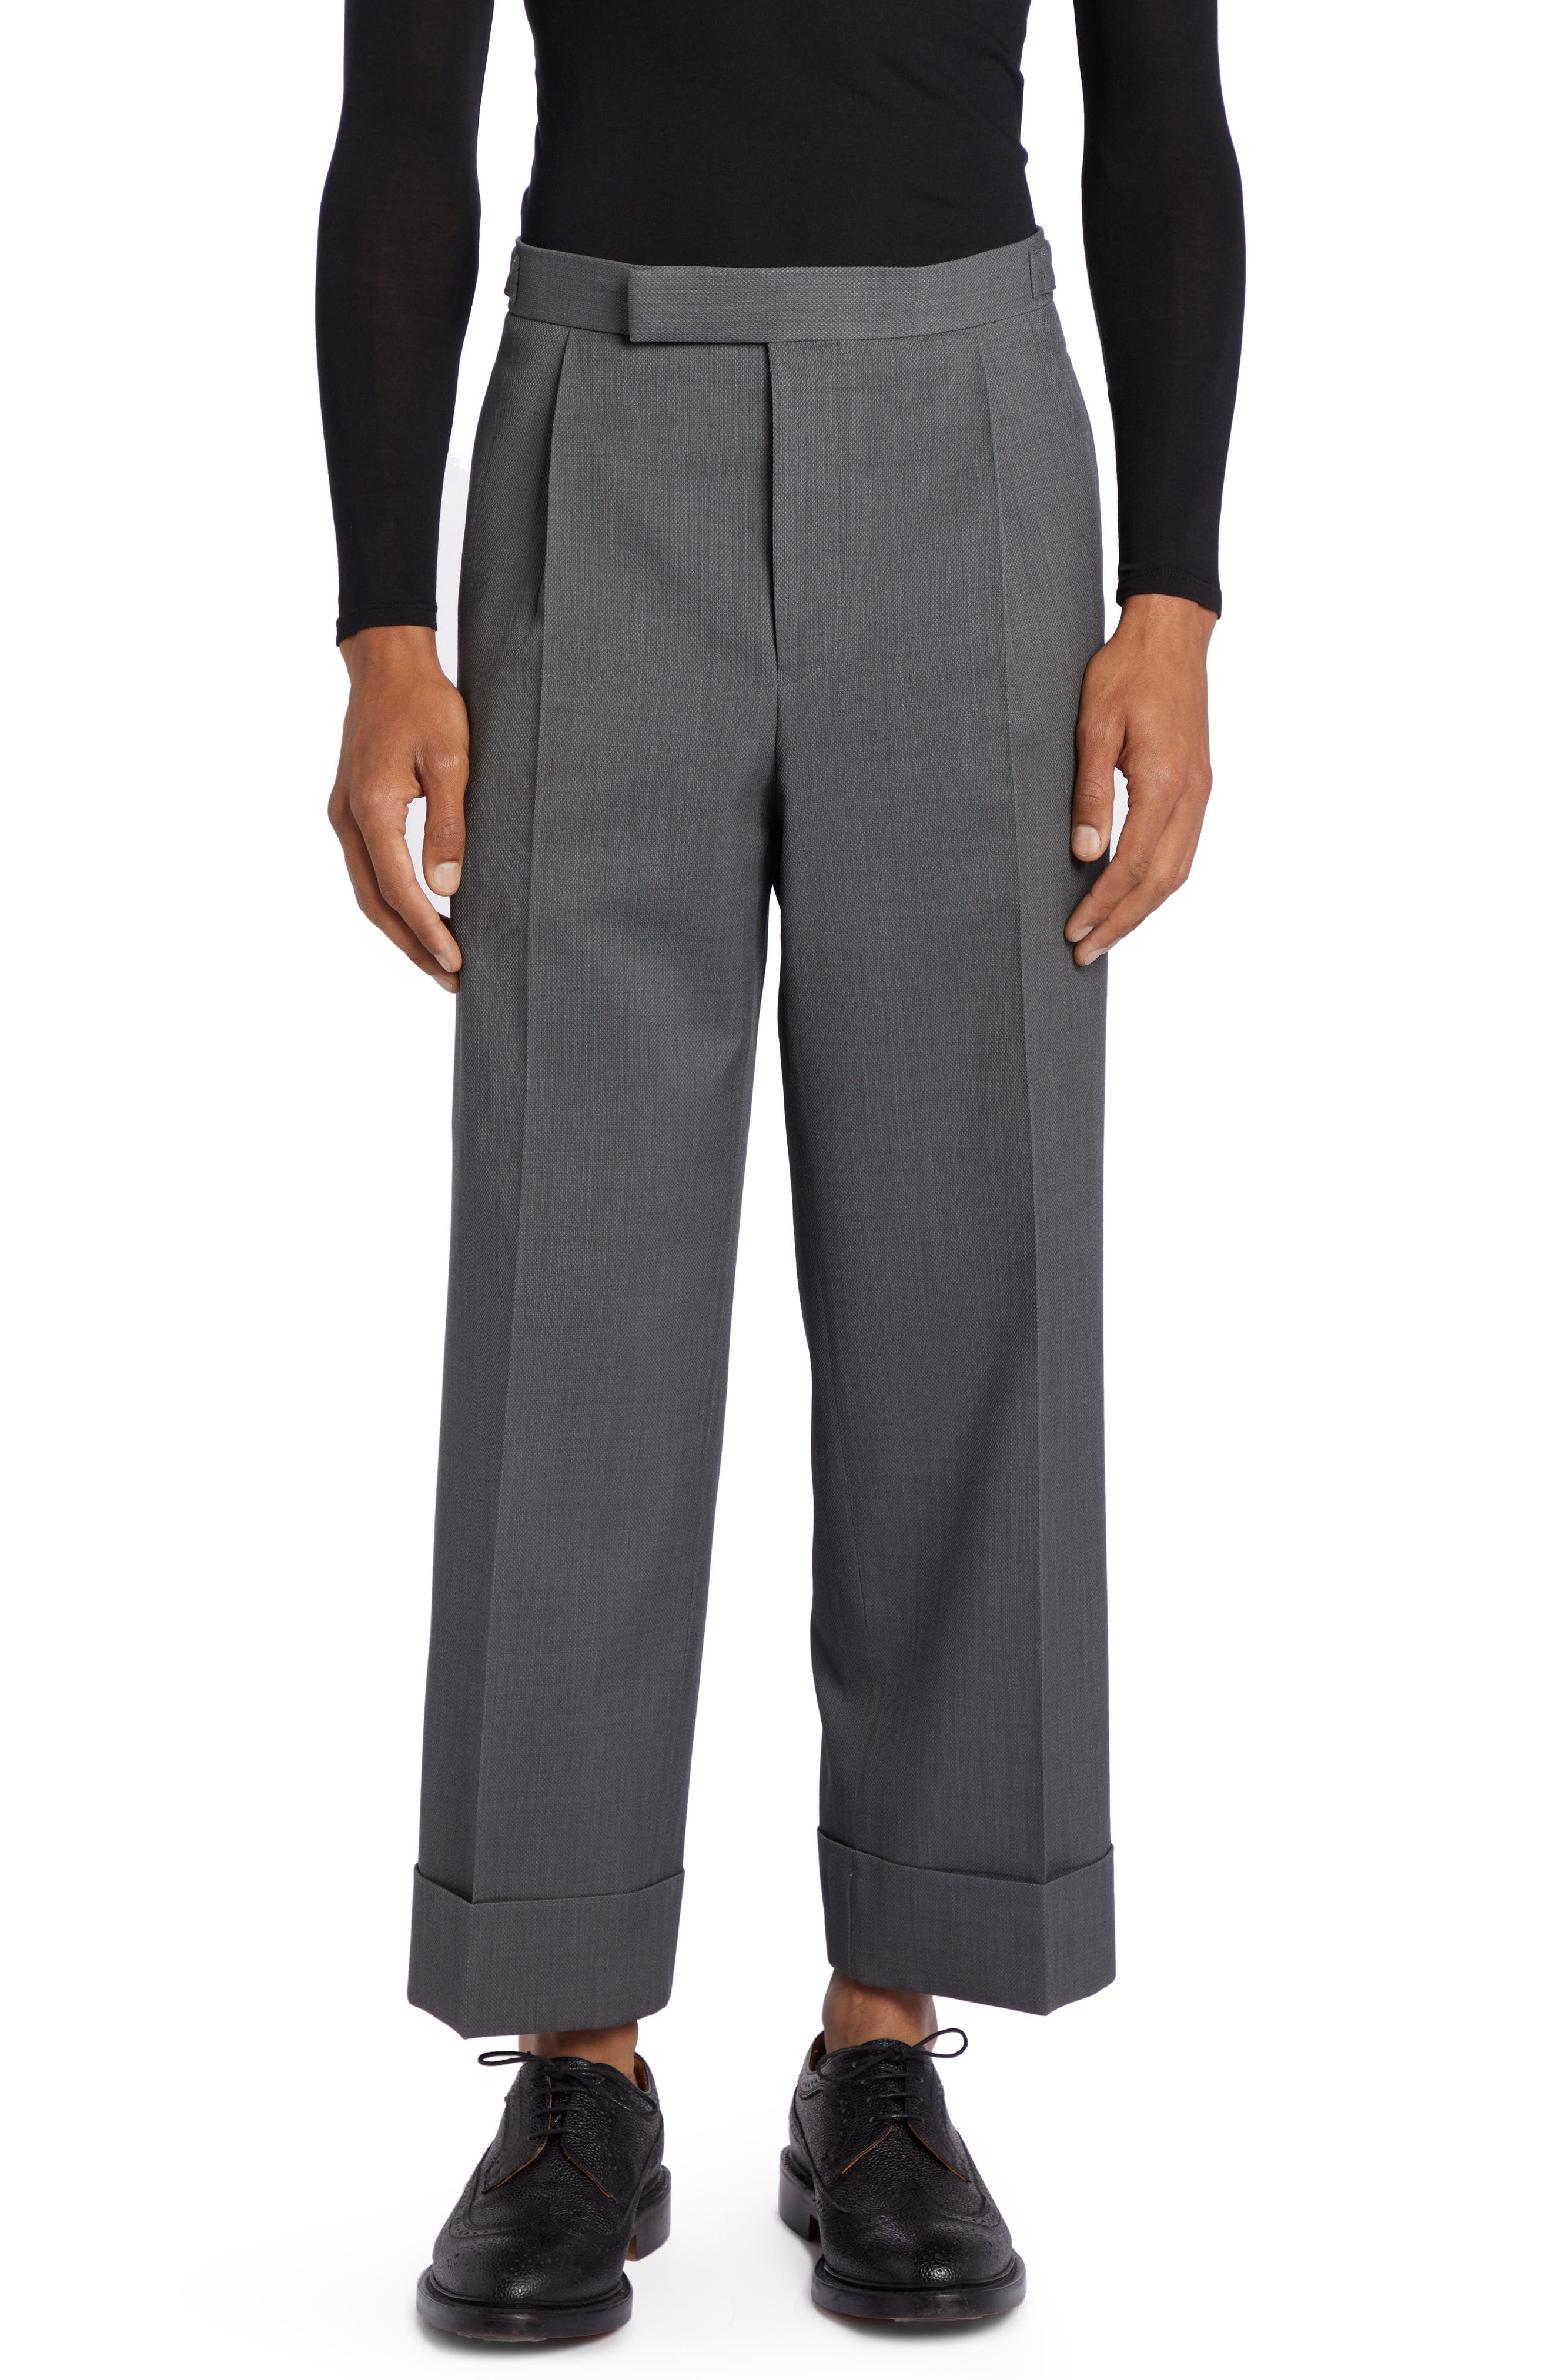 Thom Browne Unconstructed Cotton Twill Chino Trouser - Grey